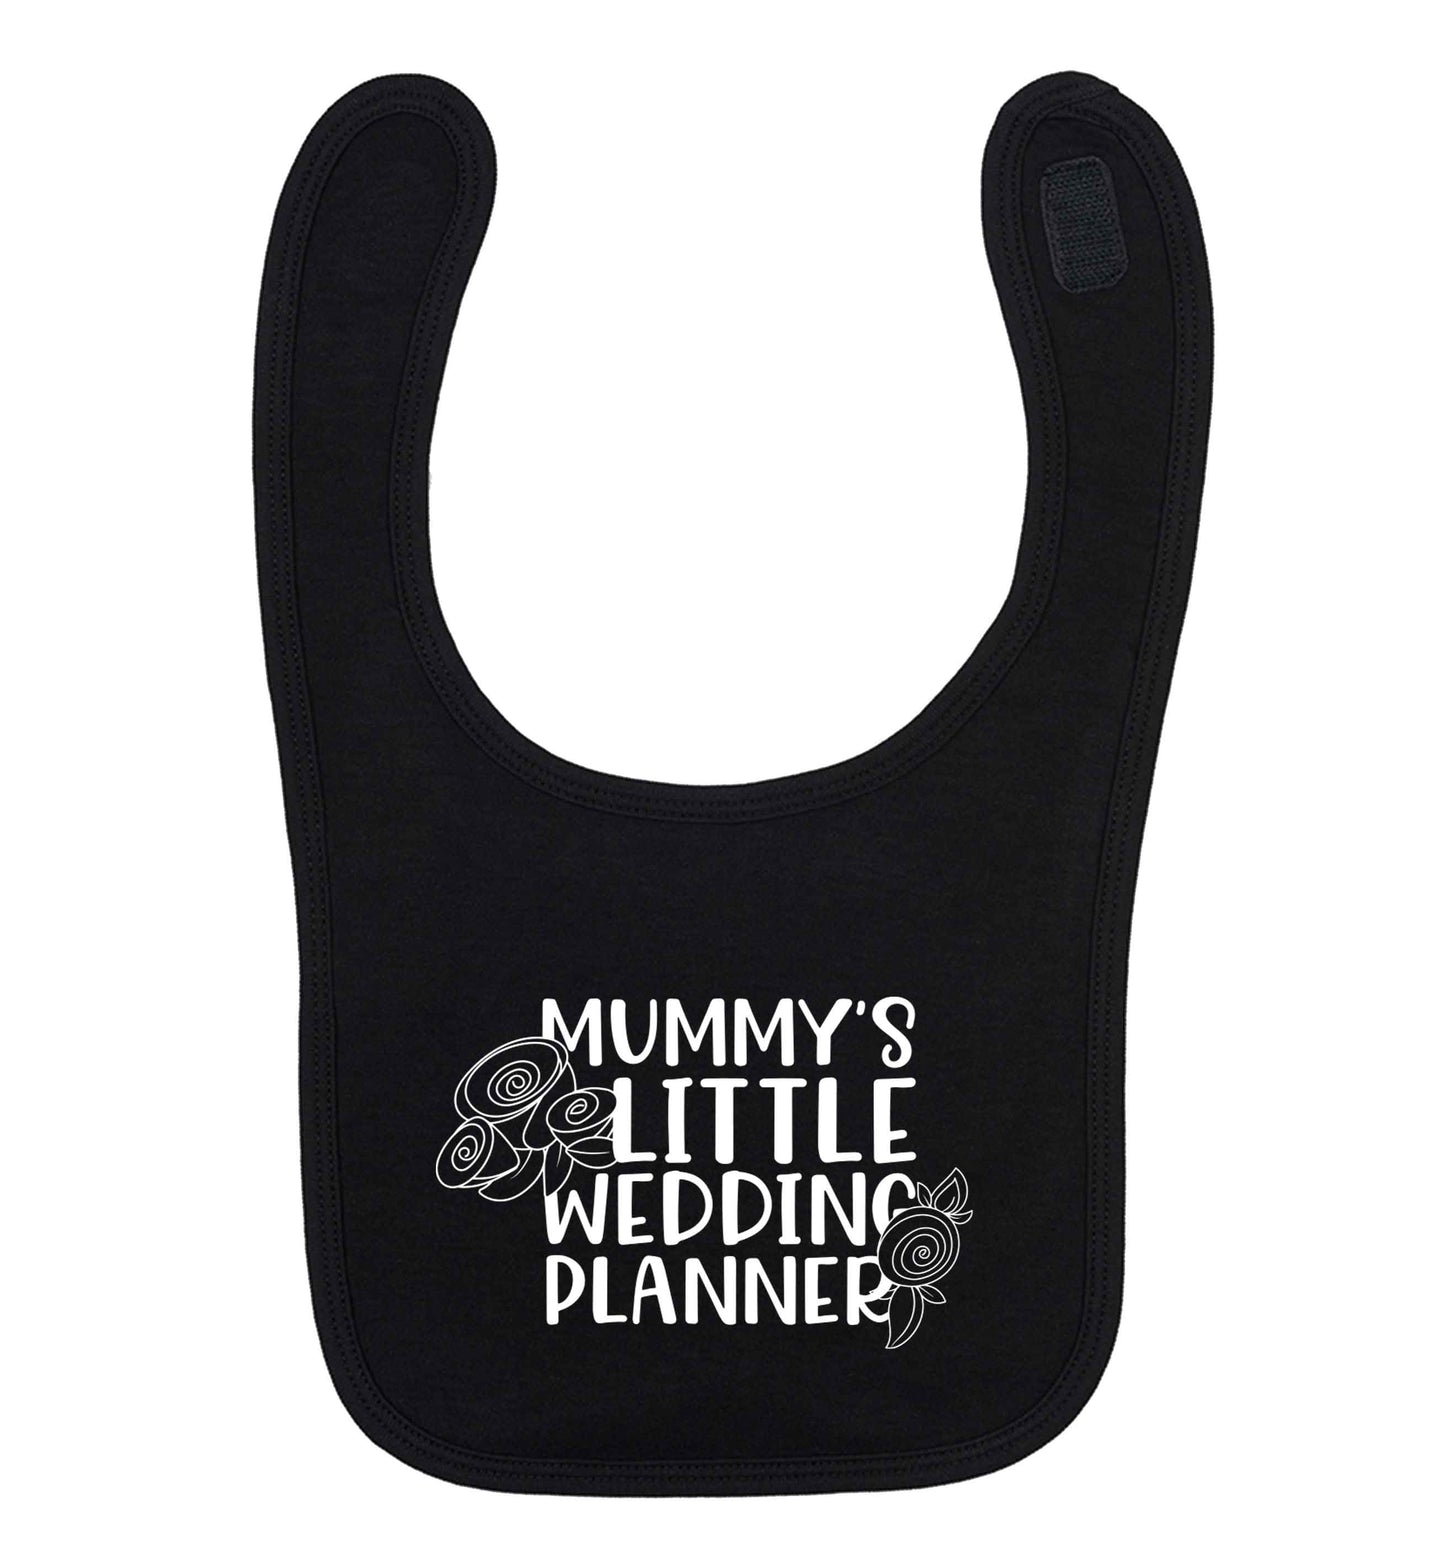 adorable wedding themed gifts for your mini wedding planner! black baby bib